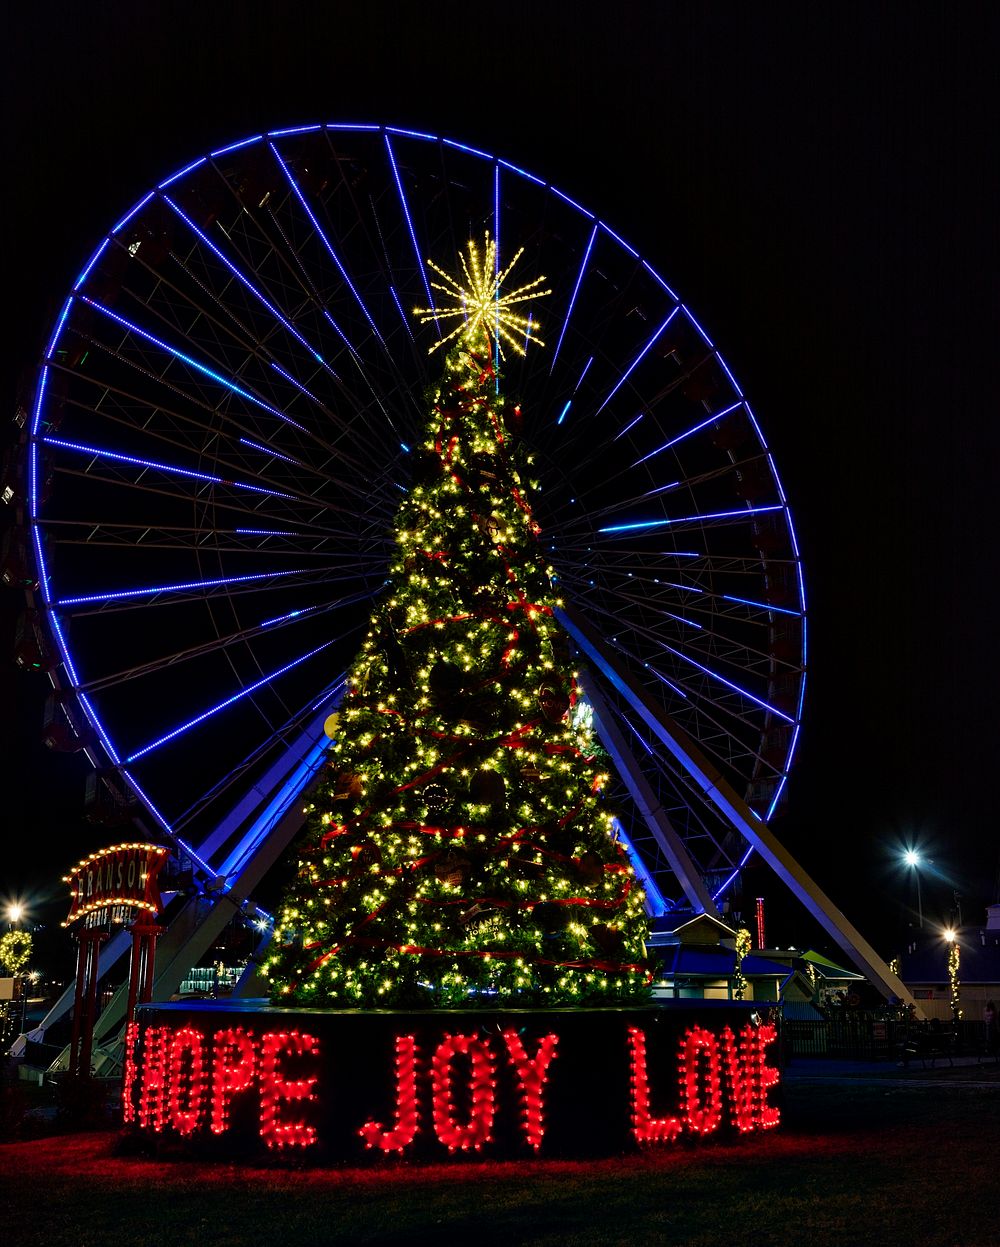                         The signature "United We Stand" Christmas tree, next to the attraction's giant Ferris wheel in…